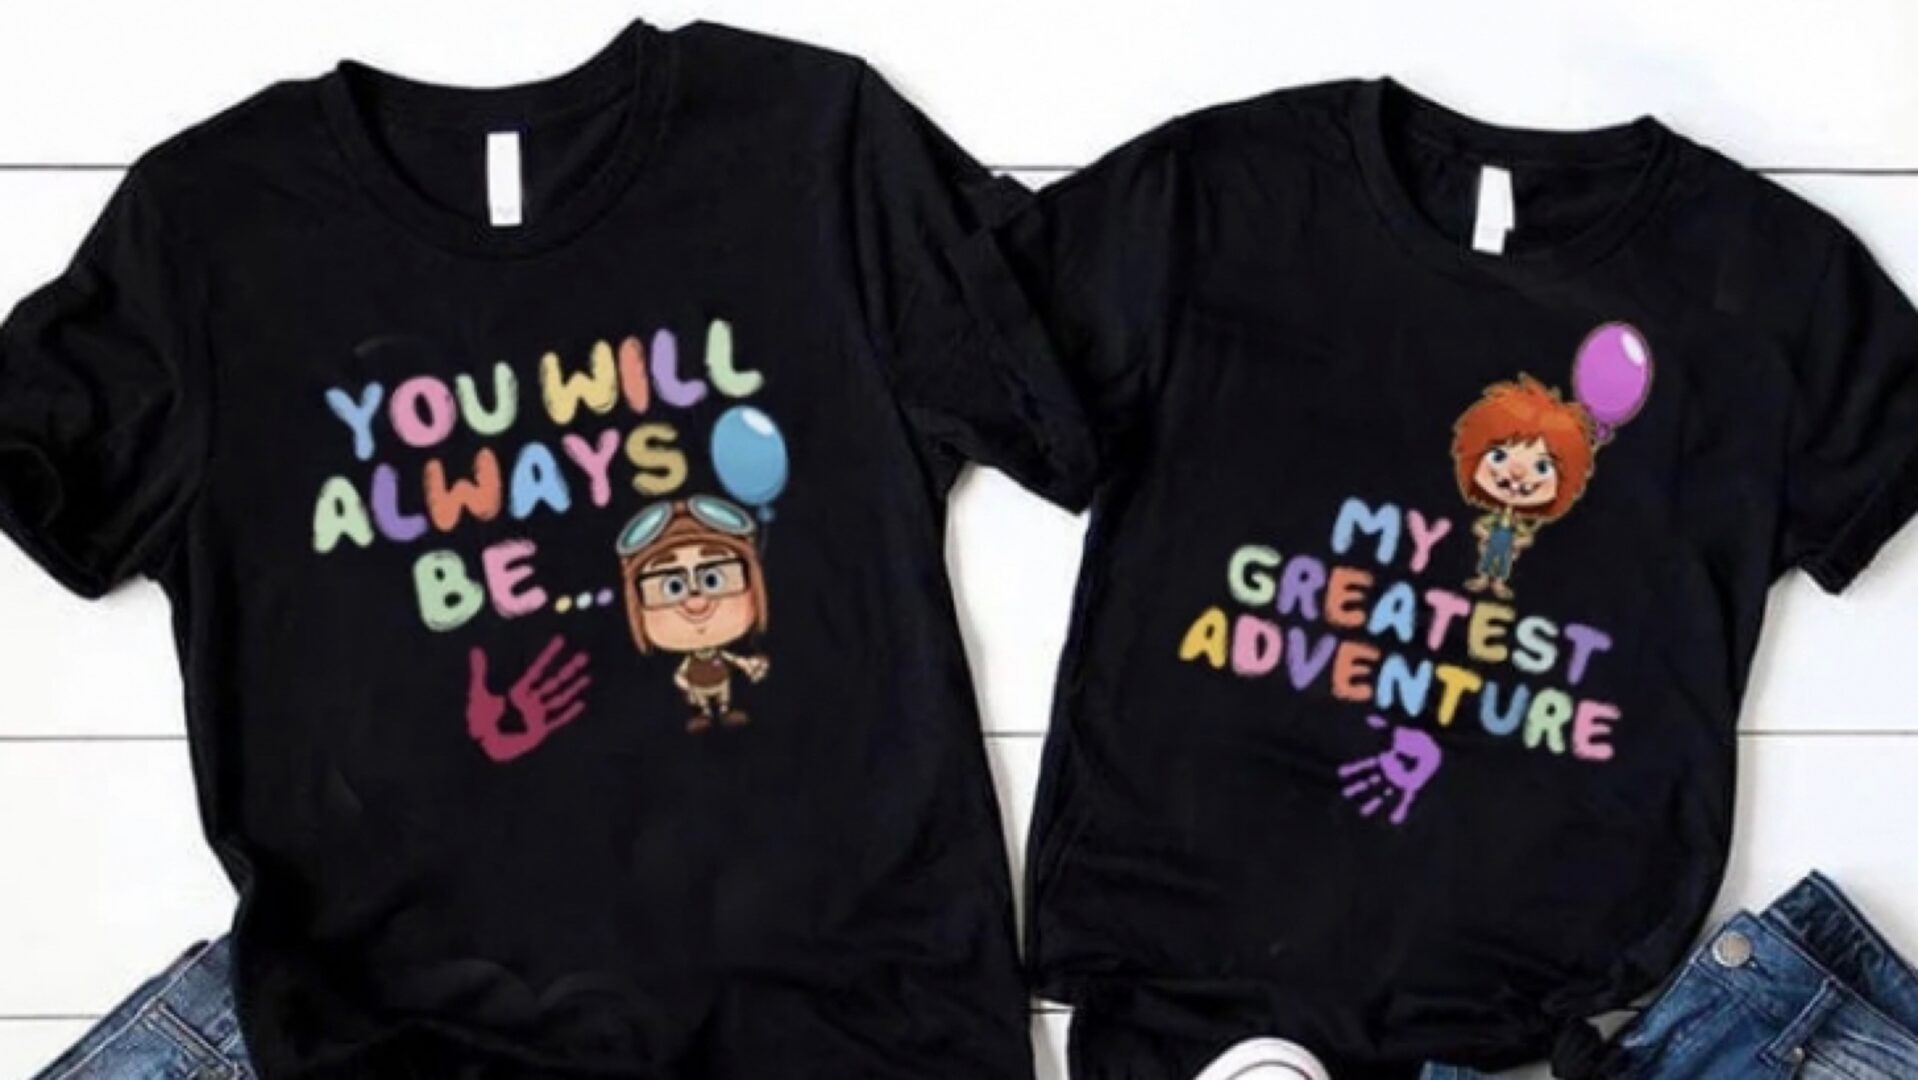 Adorable Pixar’s Up T-Shirts To Match With Your Favorite Person!